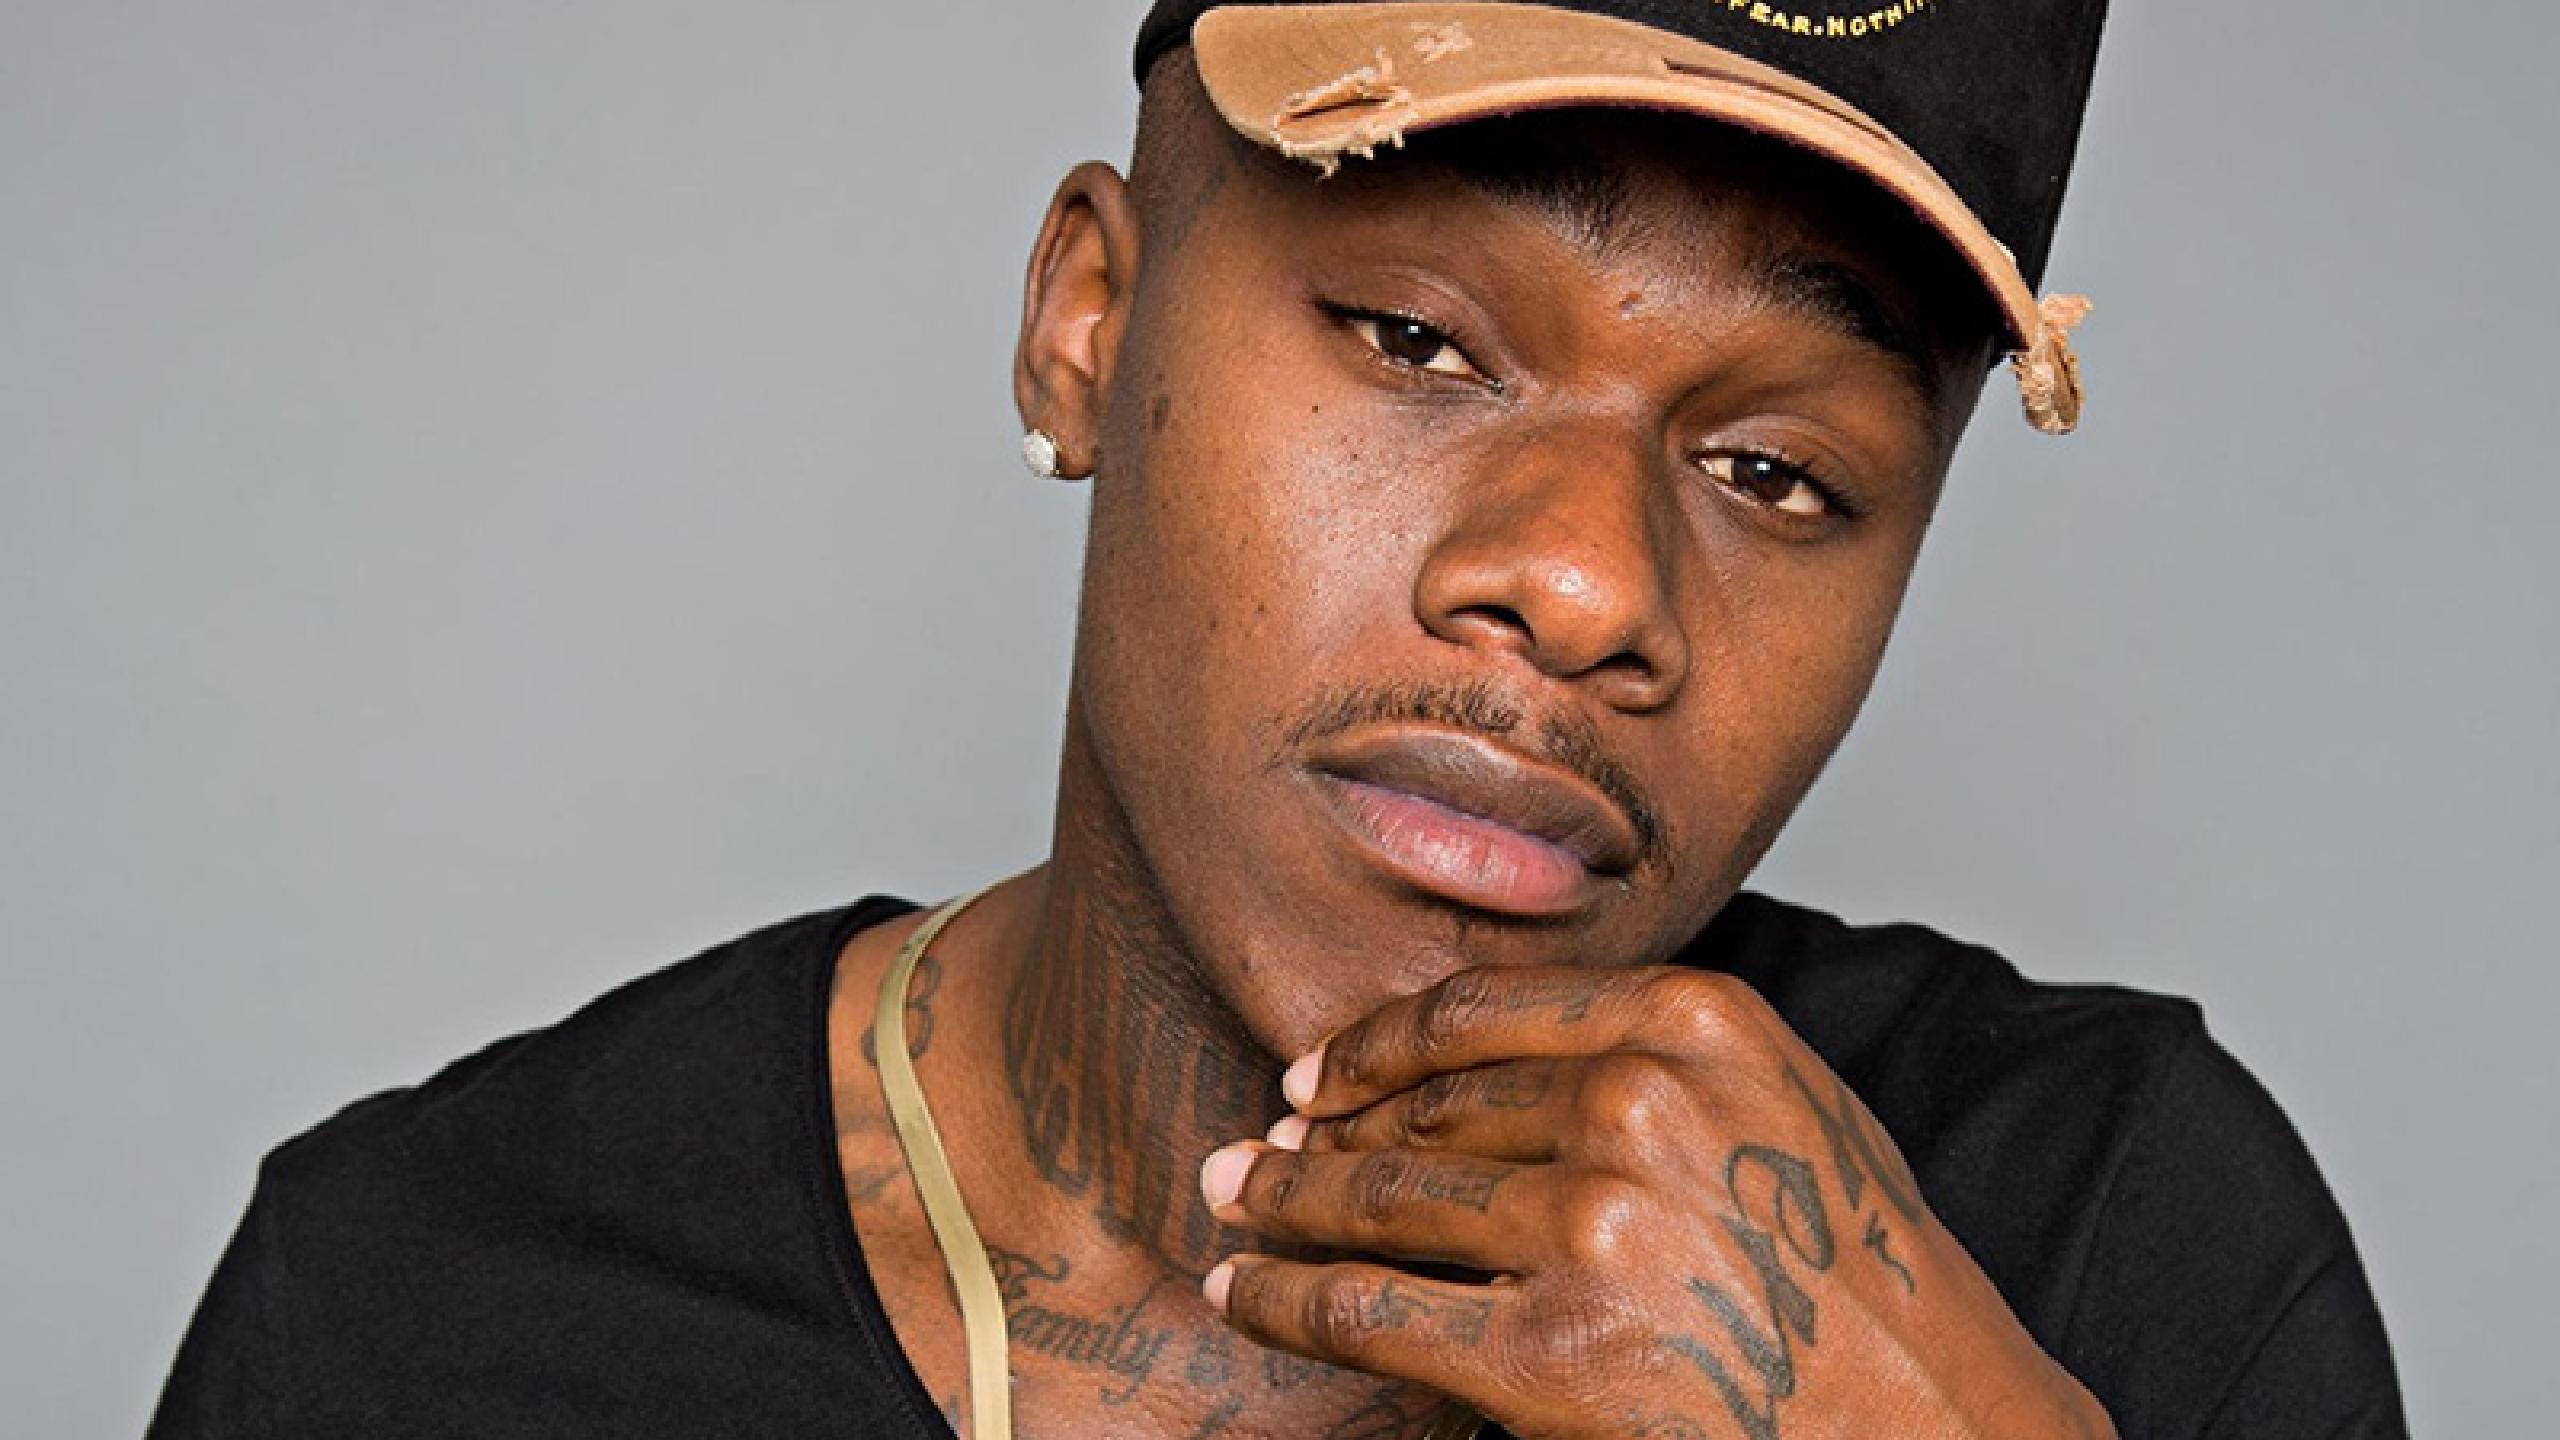 DaBaby tour dates 2019 2020. DaBaby tickets and concerts. Wegow